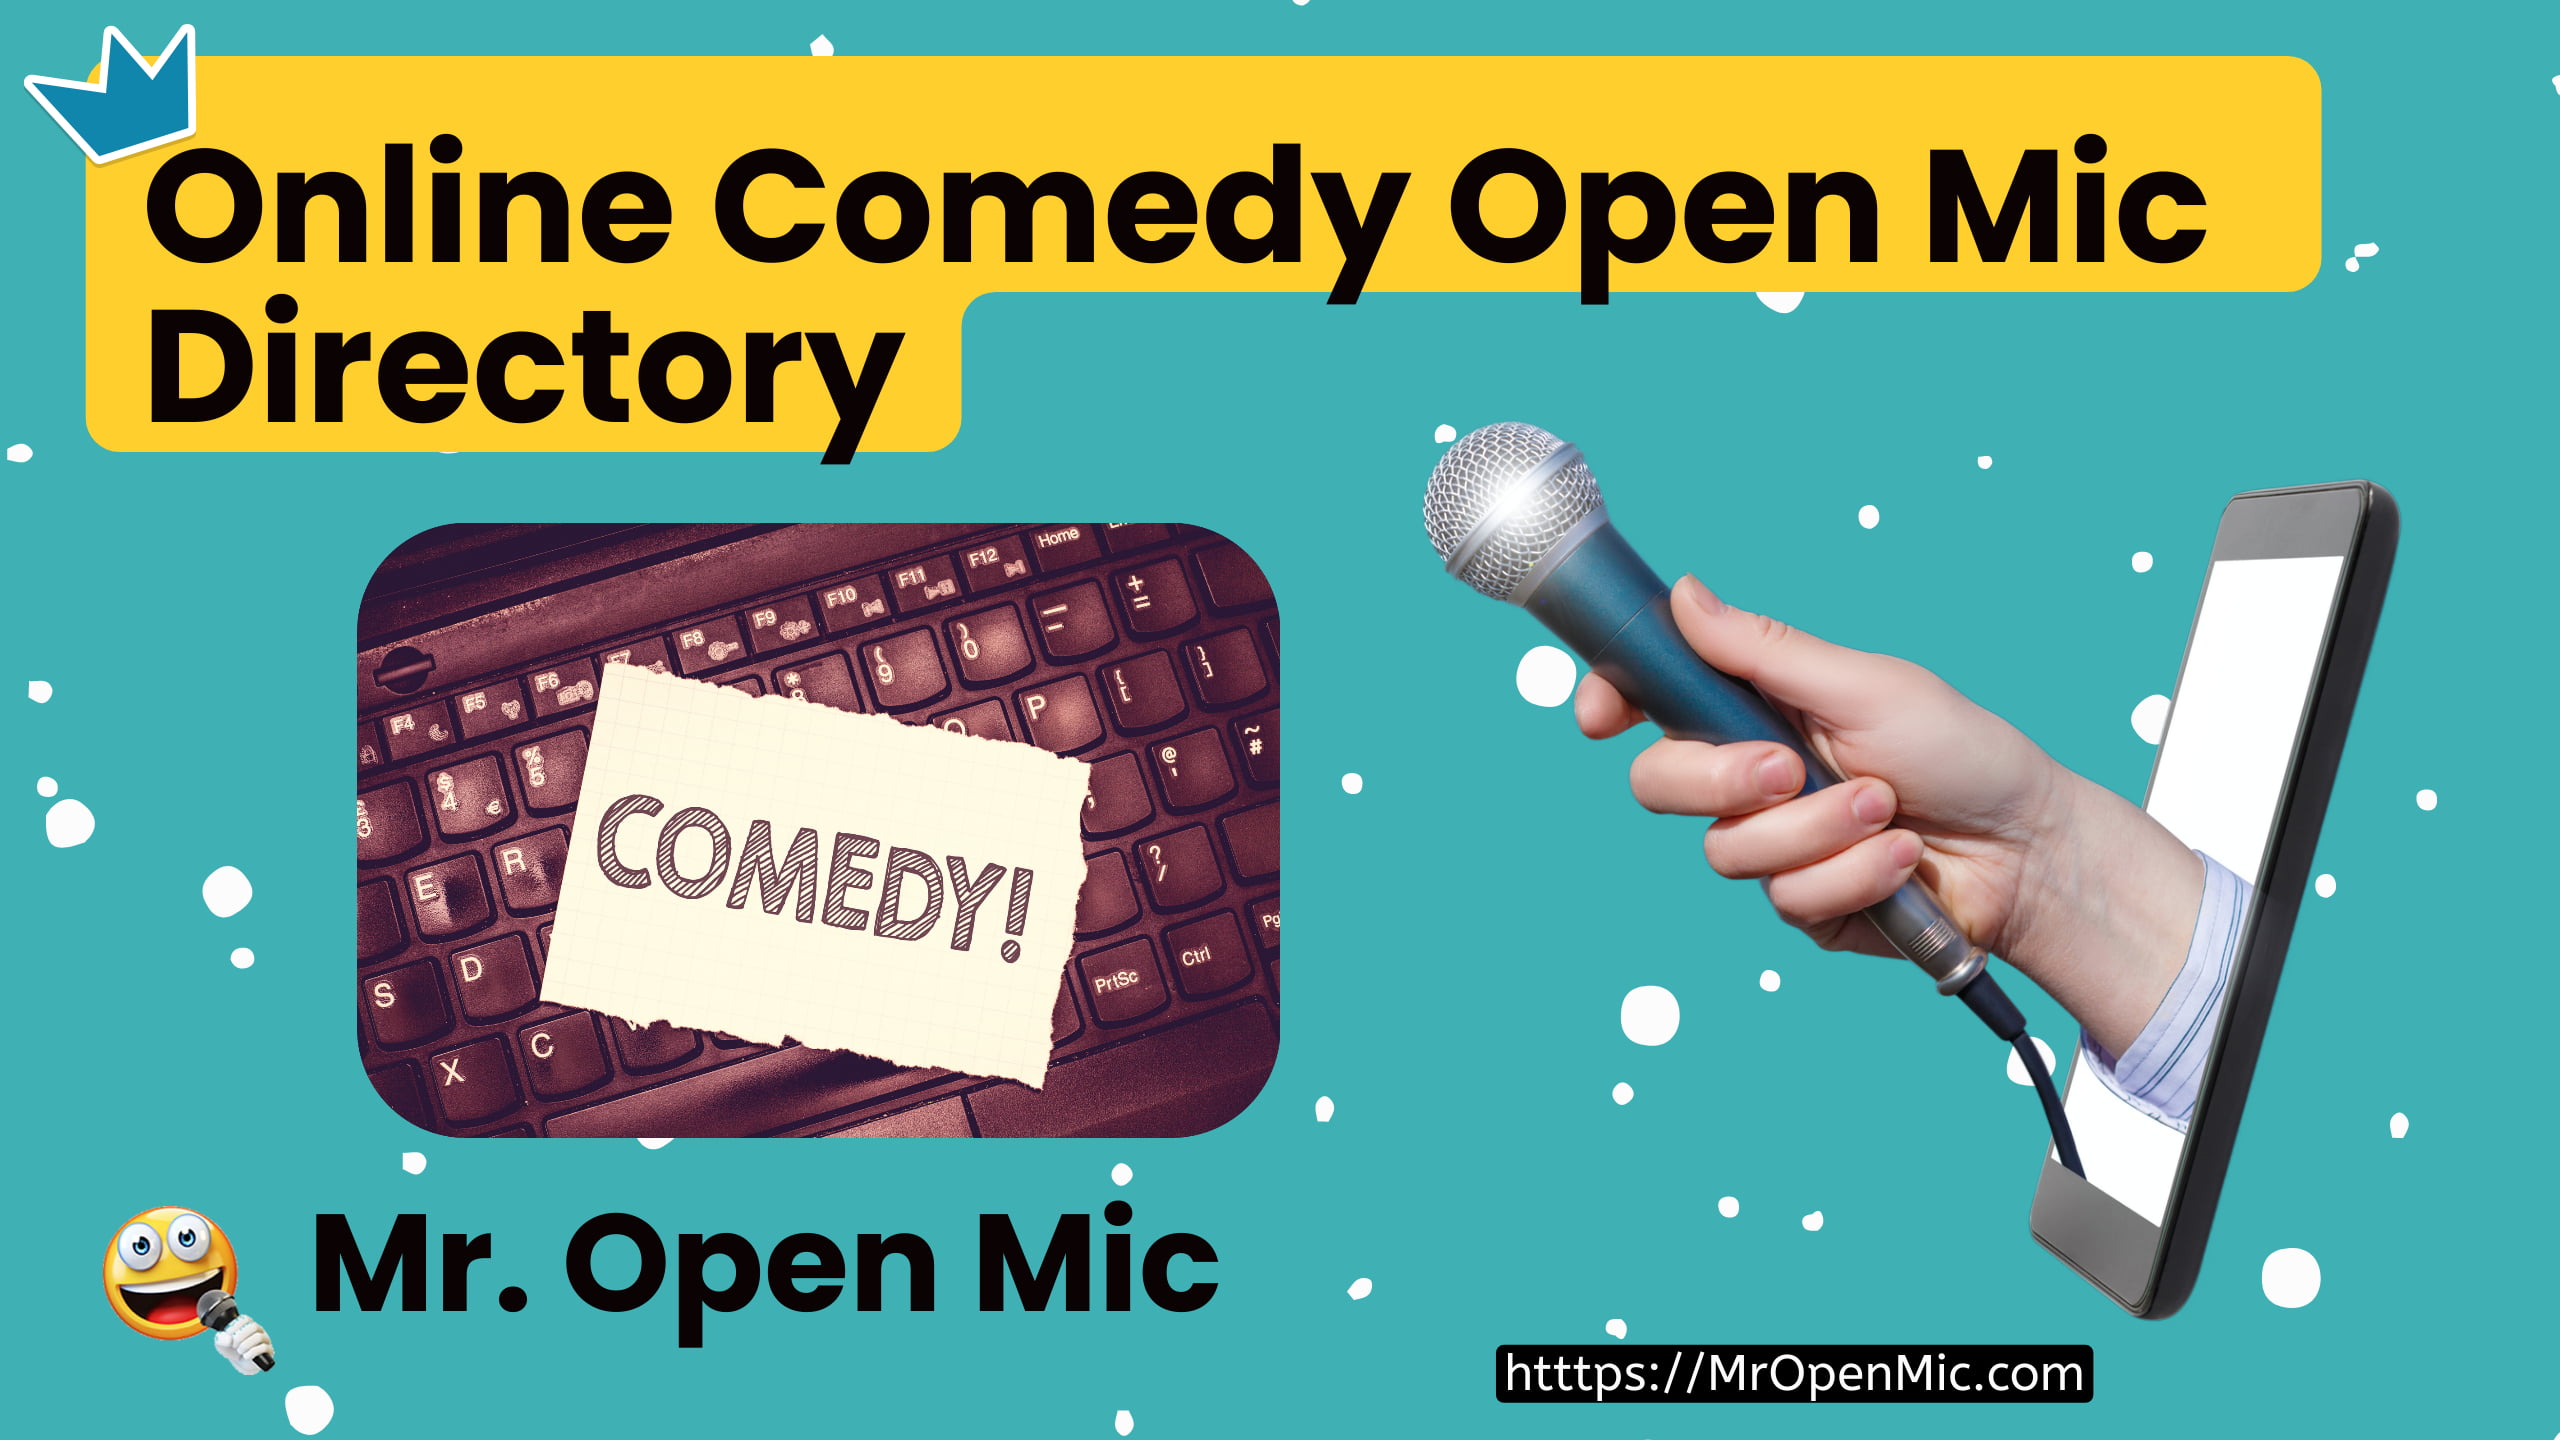 Mr. Open Mic  The Online Comedy Open Mic Directory